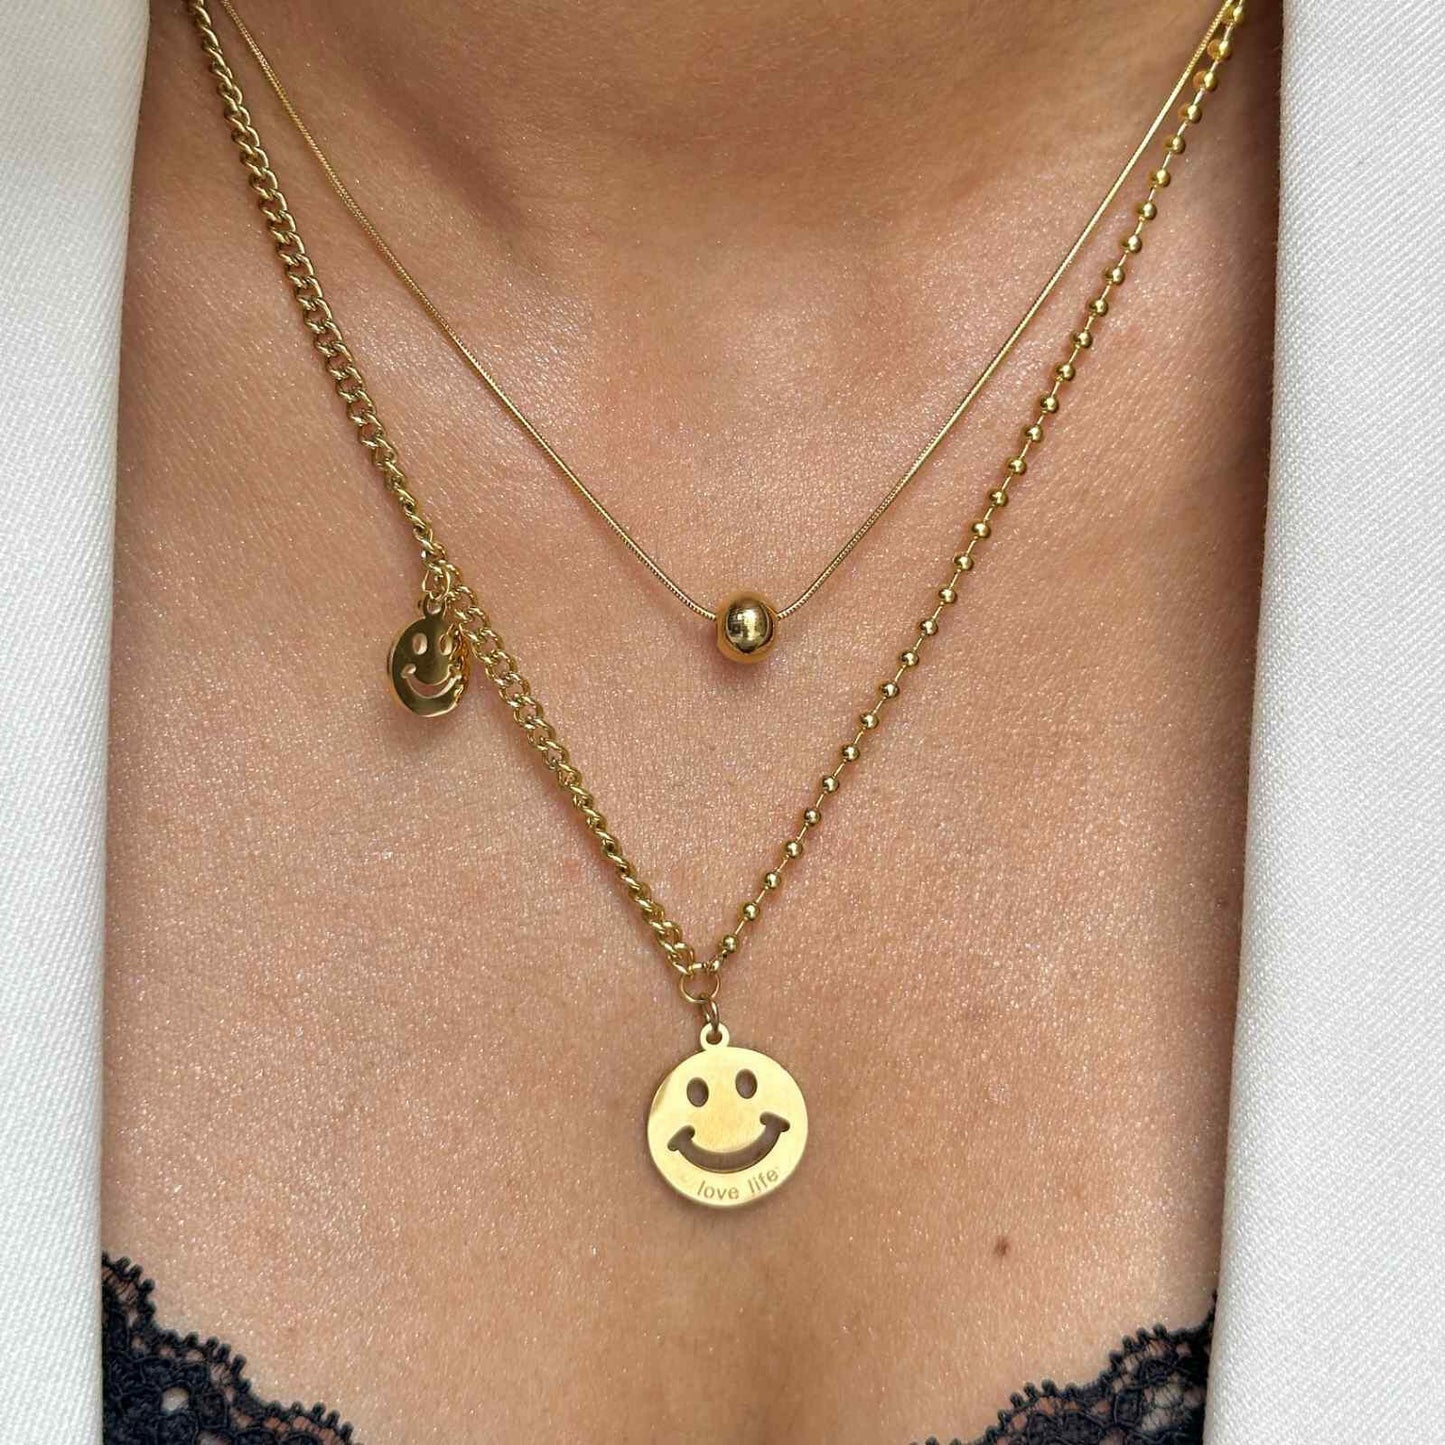 Good Vibes Necklace  The Chic Women.